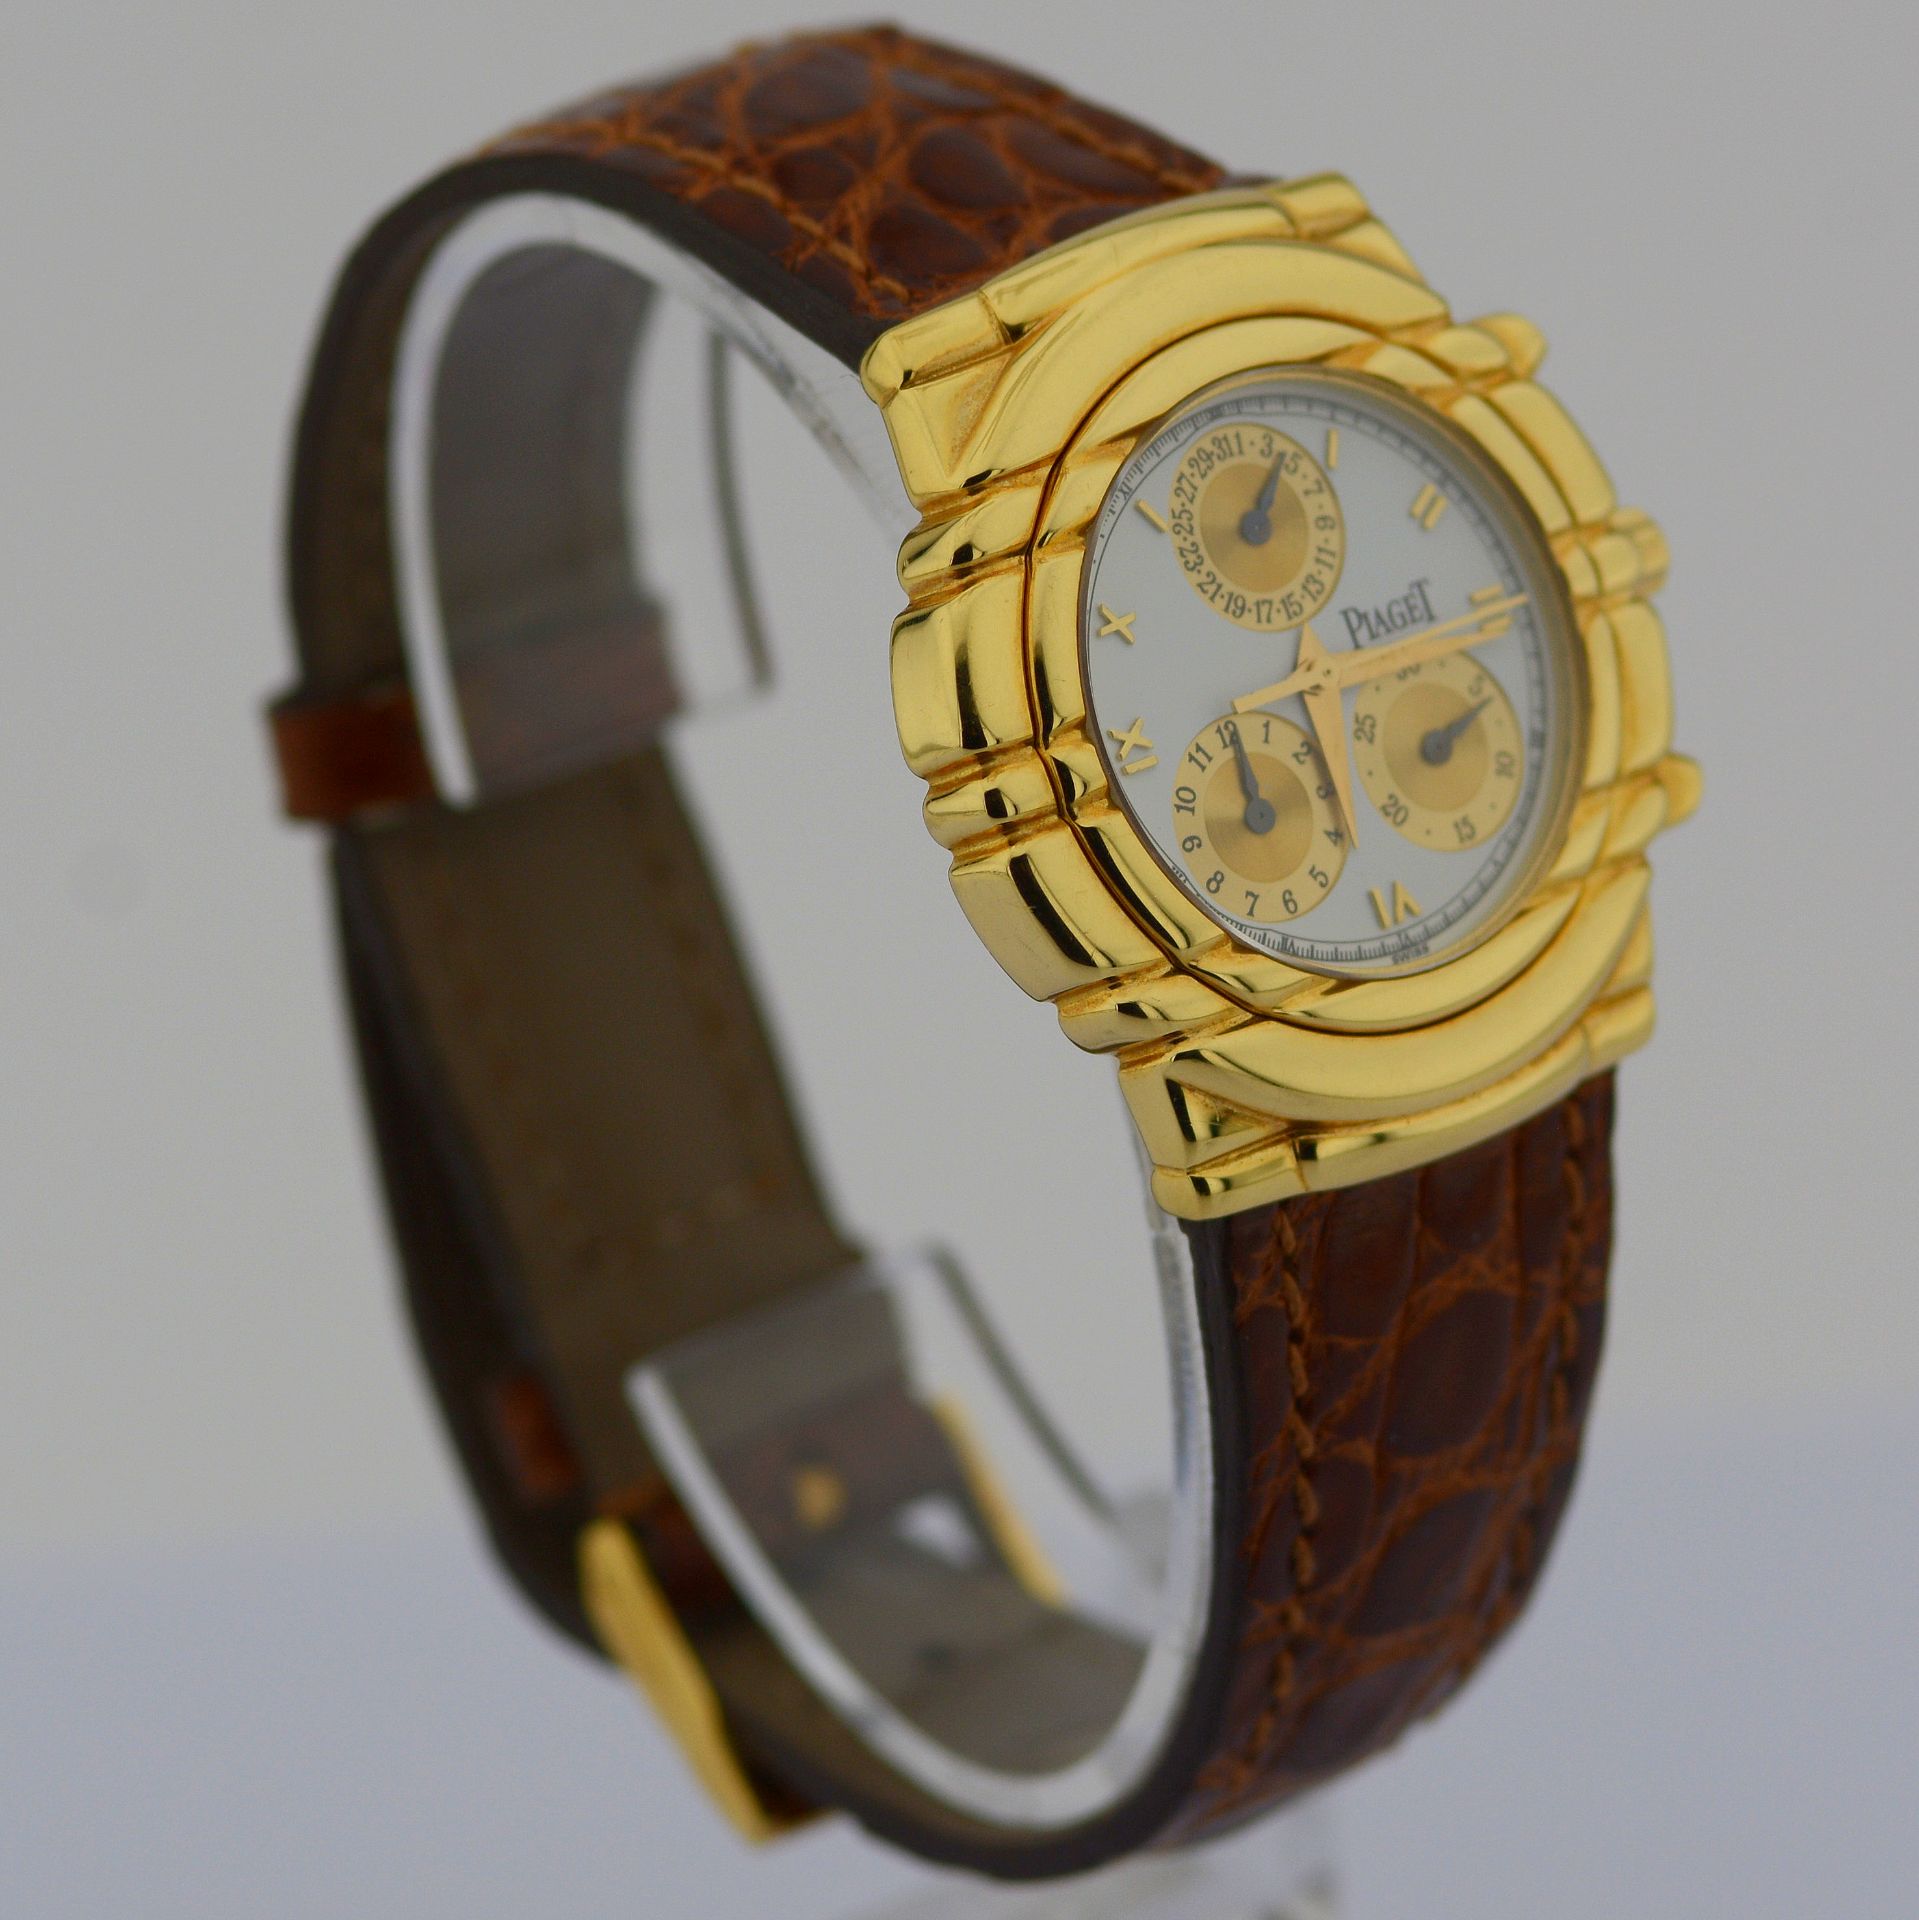 Piaget / Tanagra Chronograph - Lady's Yellow gold Wrist Watch - Image 9 of 15